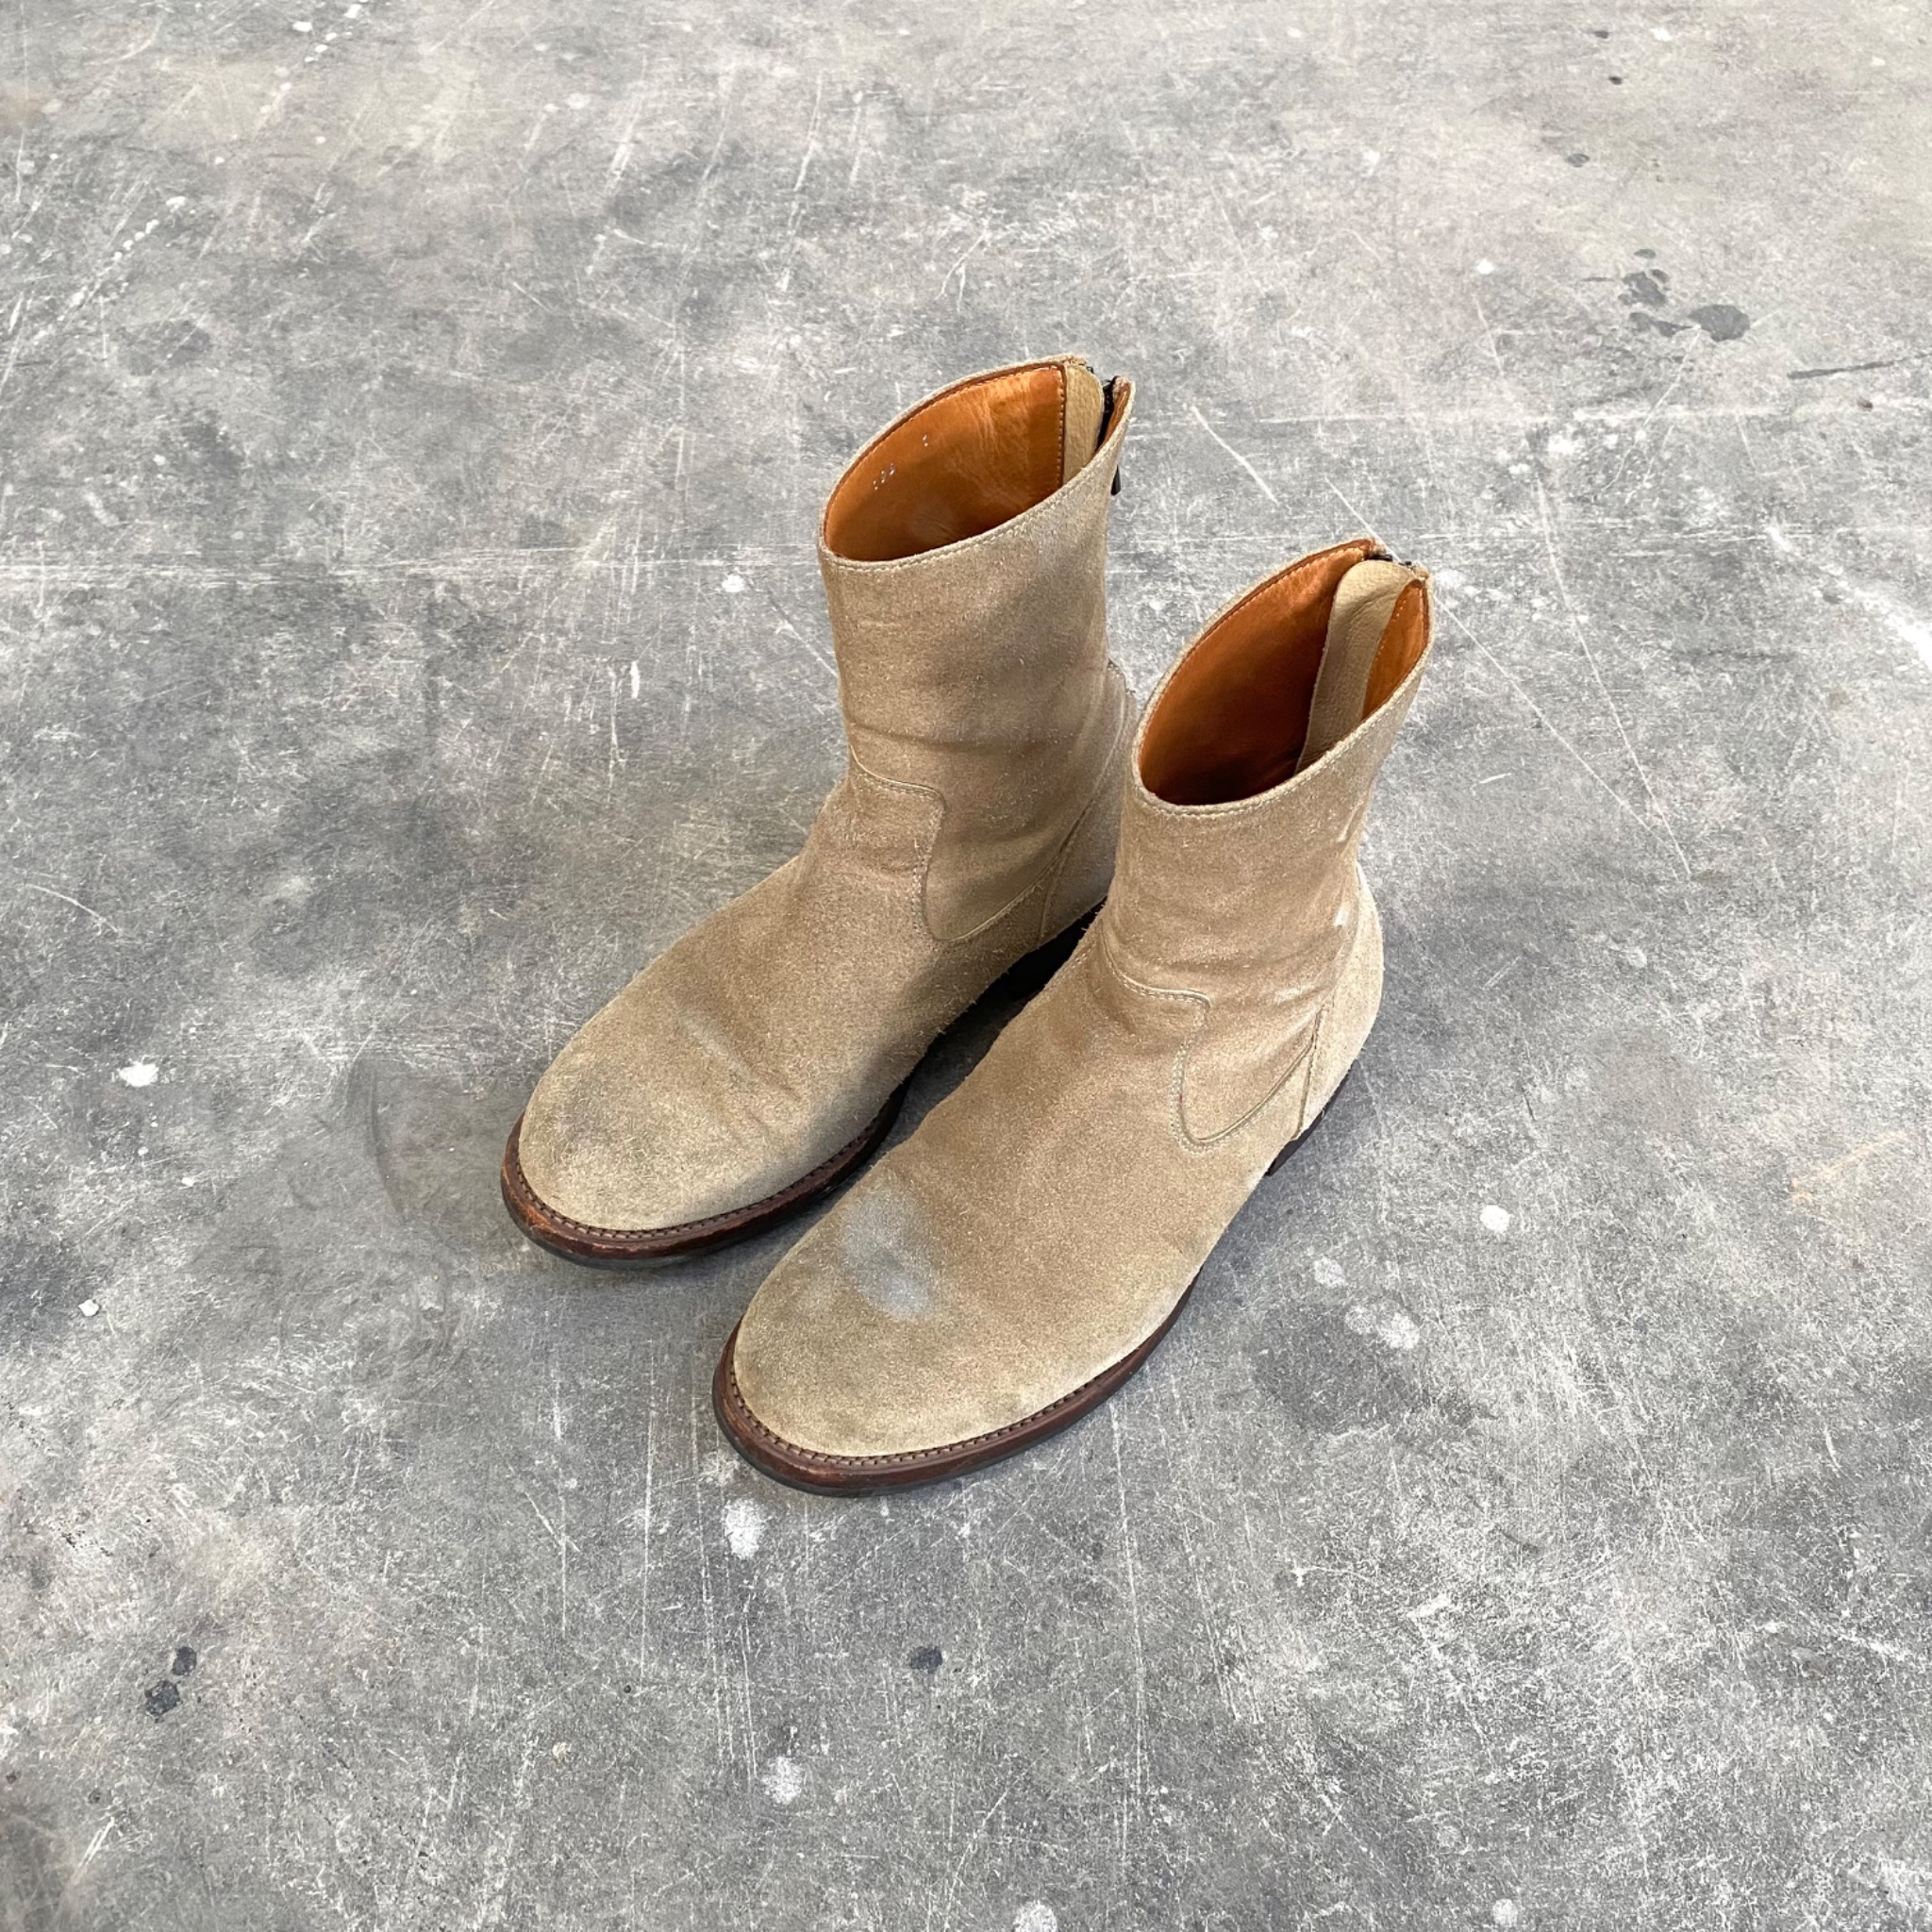 Boots – Around the shoess